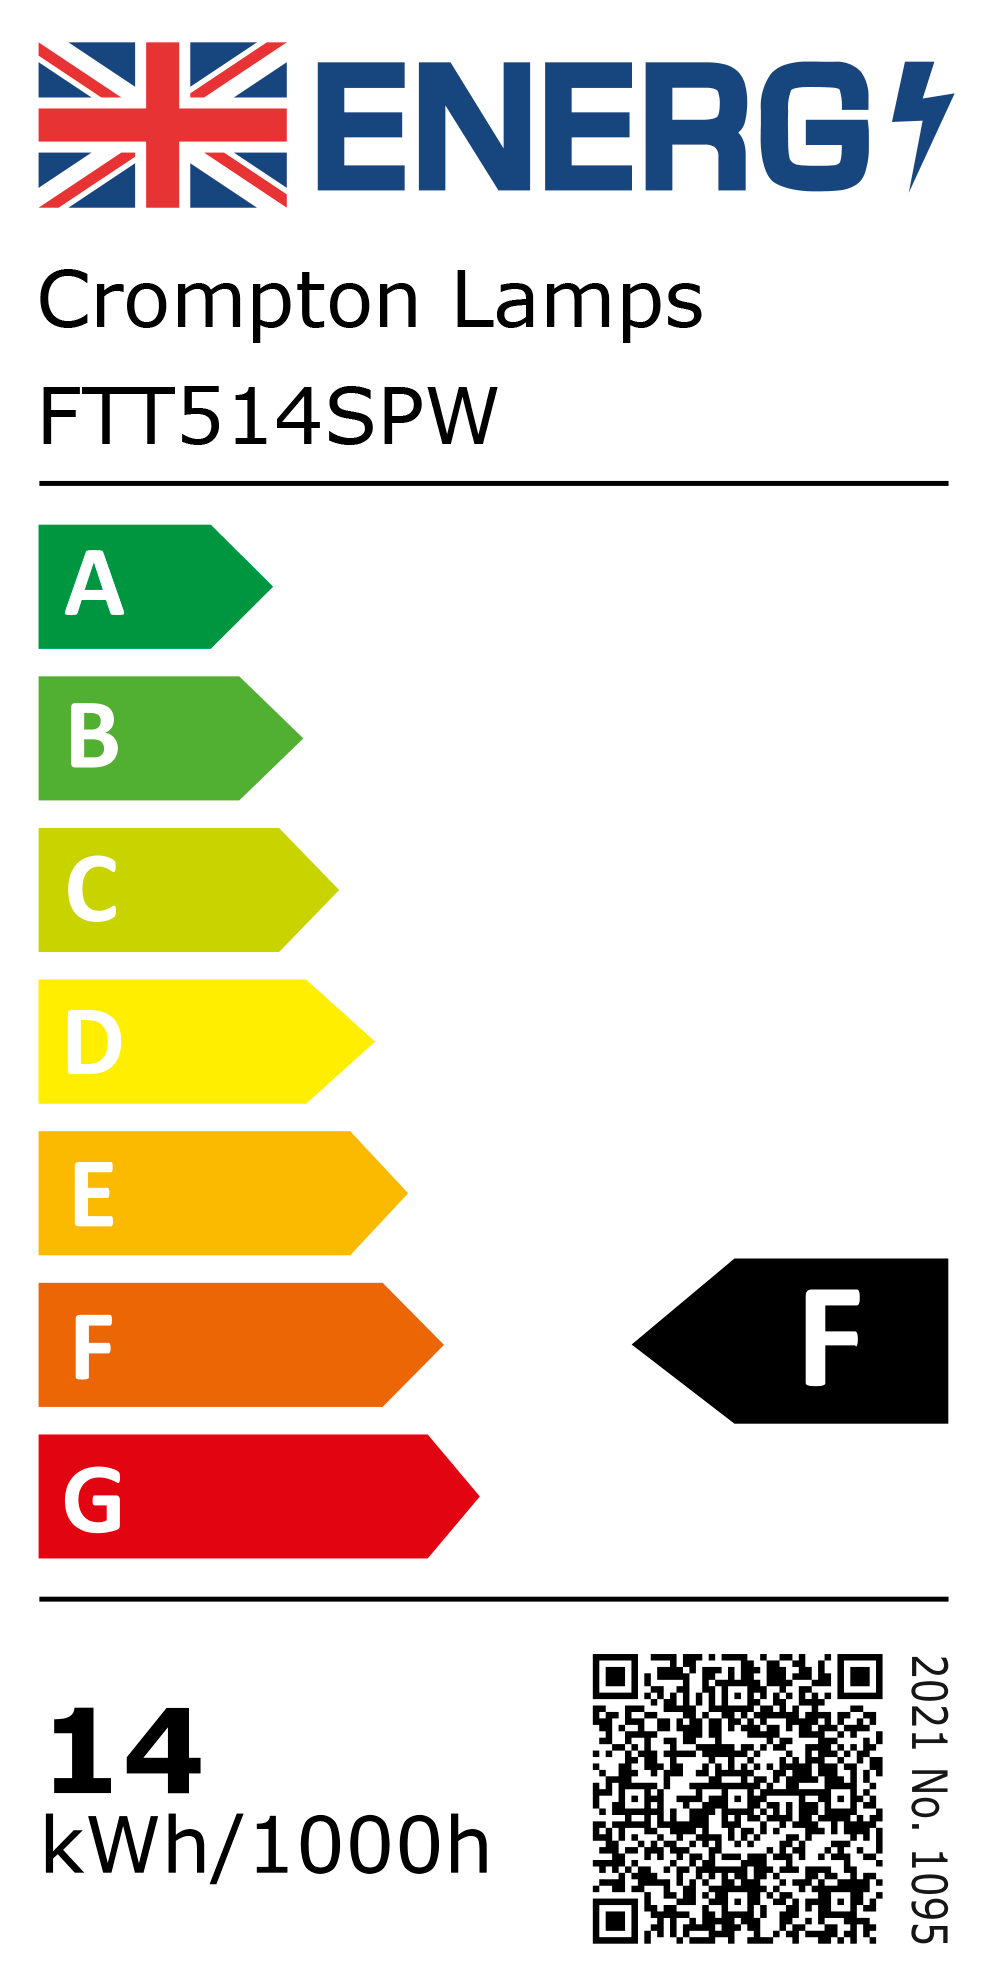 New 2021 Energy Rating Label: Stock Code FTT514SPW